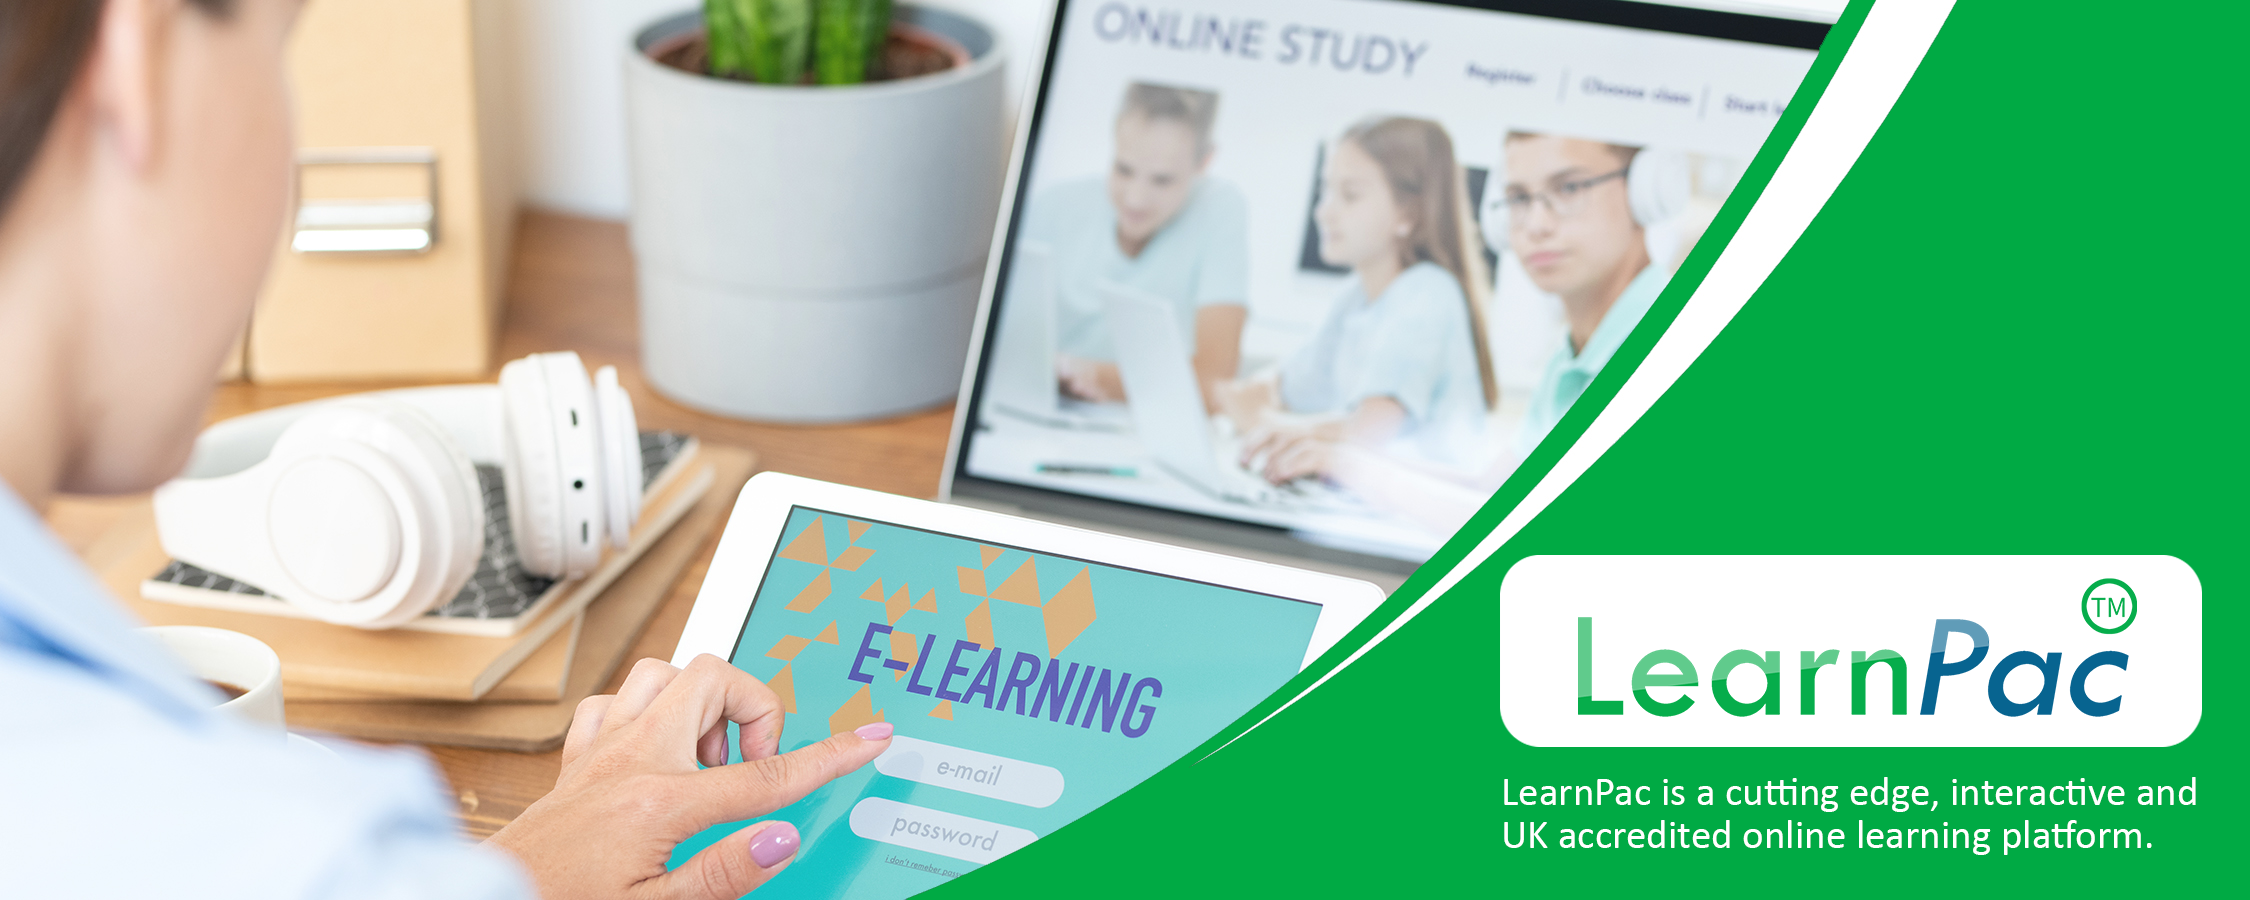 Mandatory Training for Residential Home Staff - Online Learning Courses - E-Learning Courses - LearnPac Systems UK -